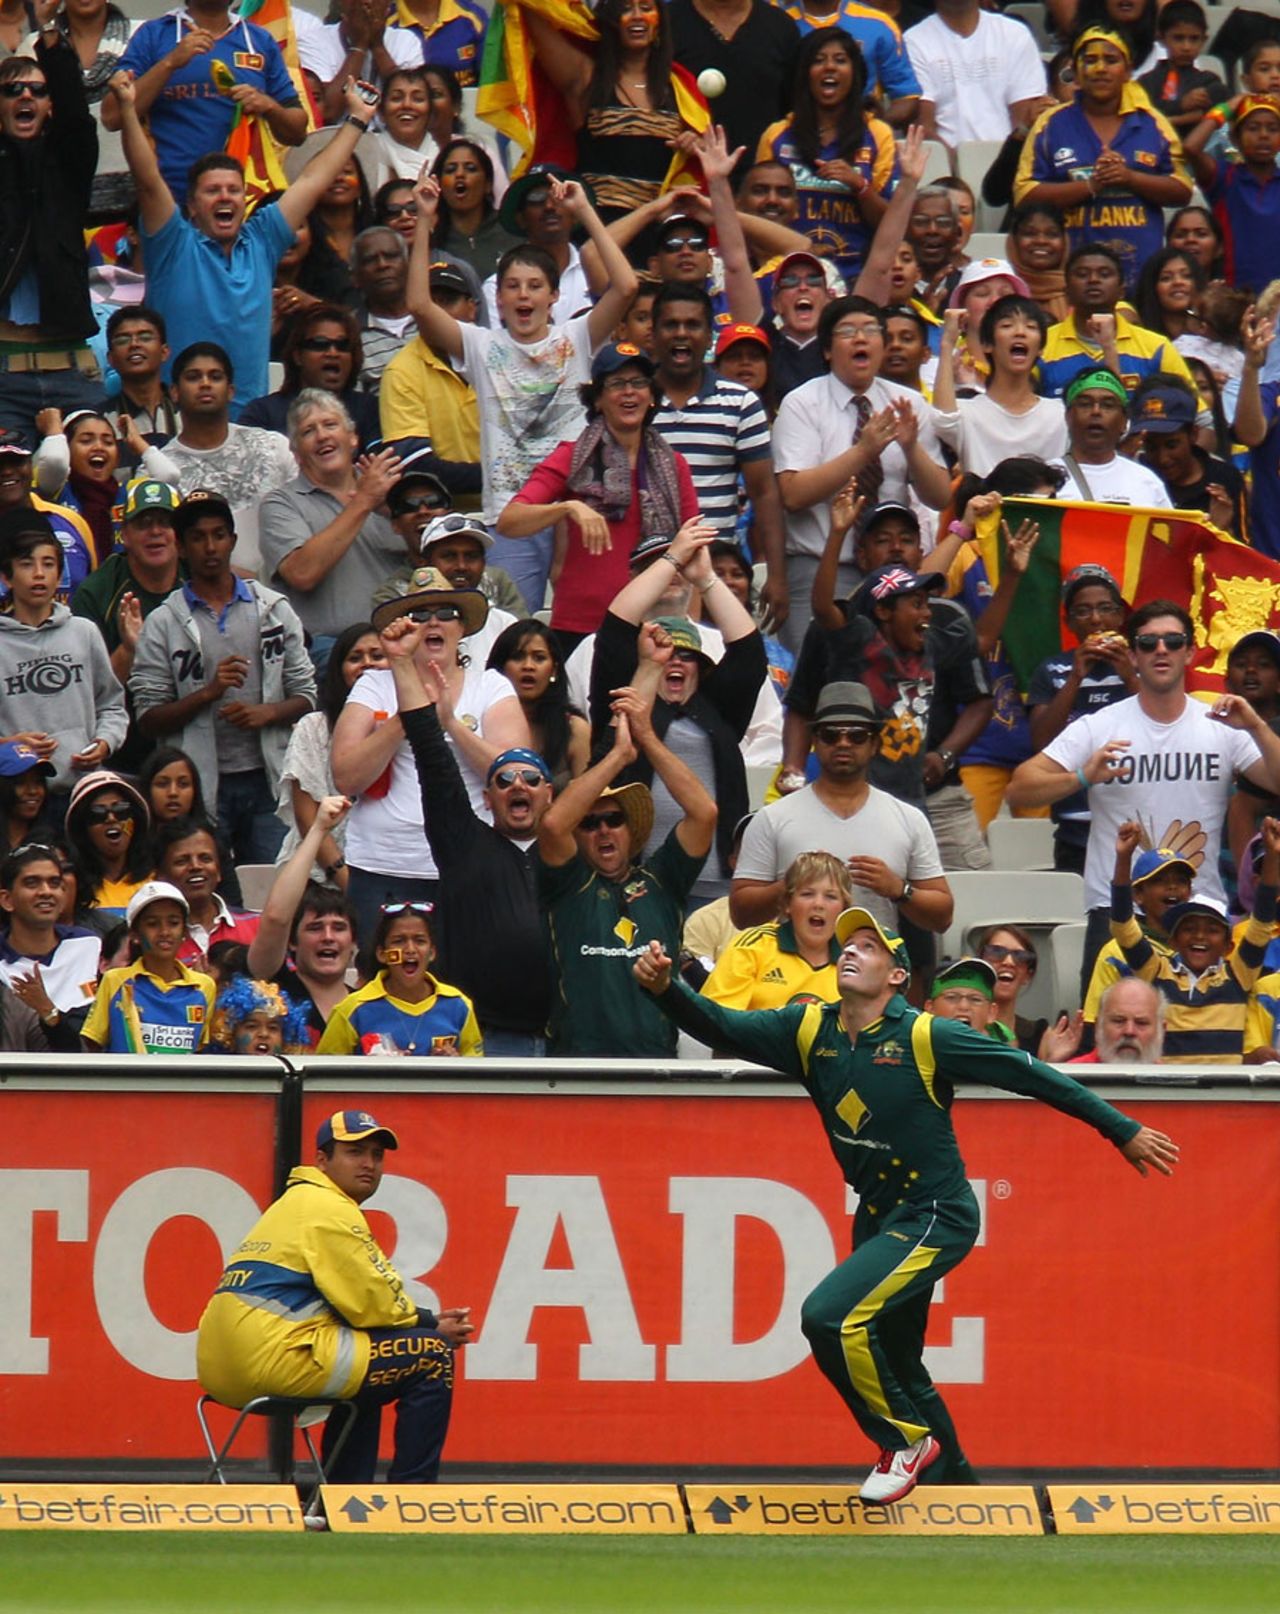 Michael Hussey is halfway through completing a spectacular catch, CB series, Melbourne, March 2, 2012